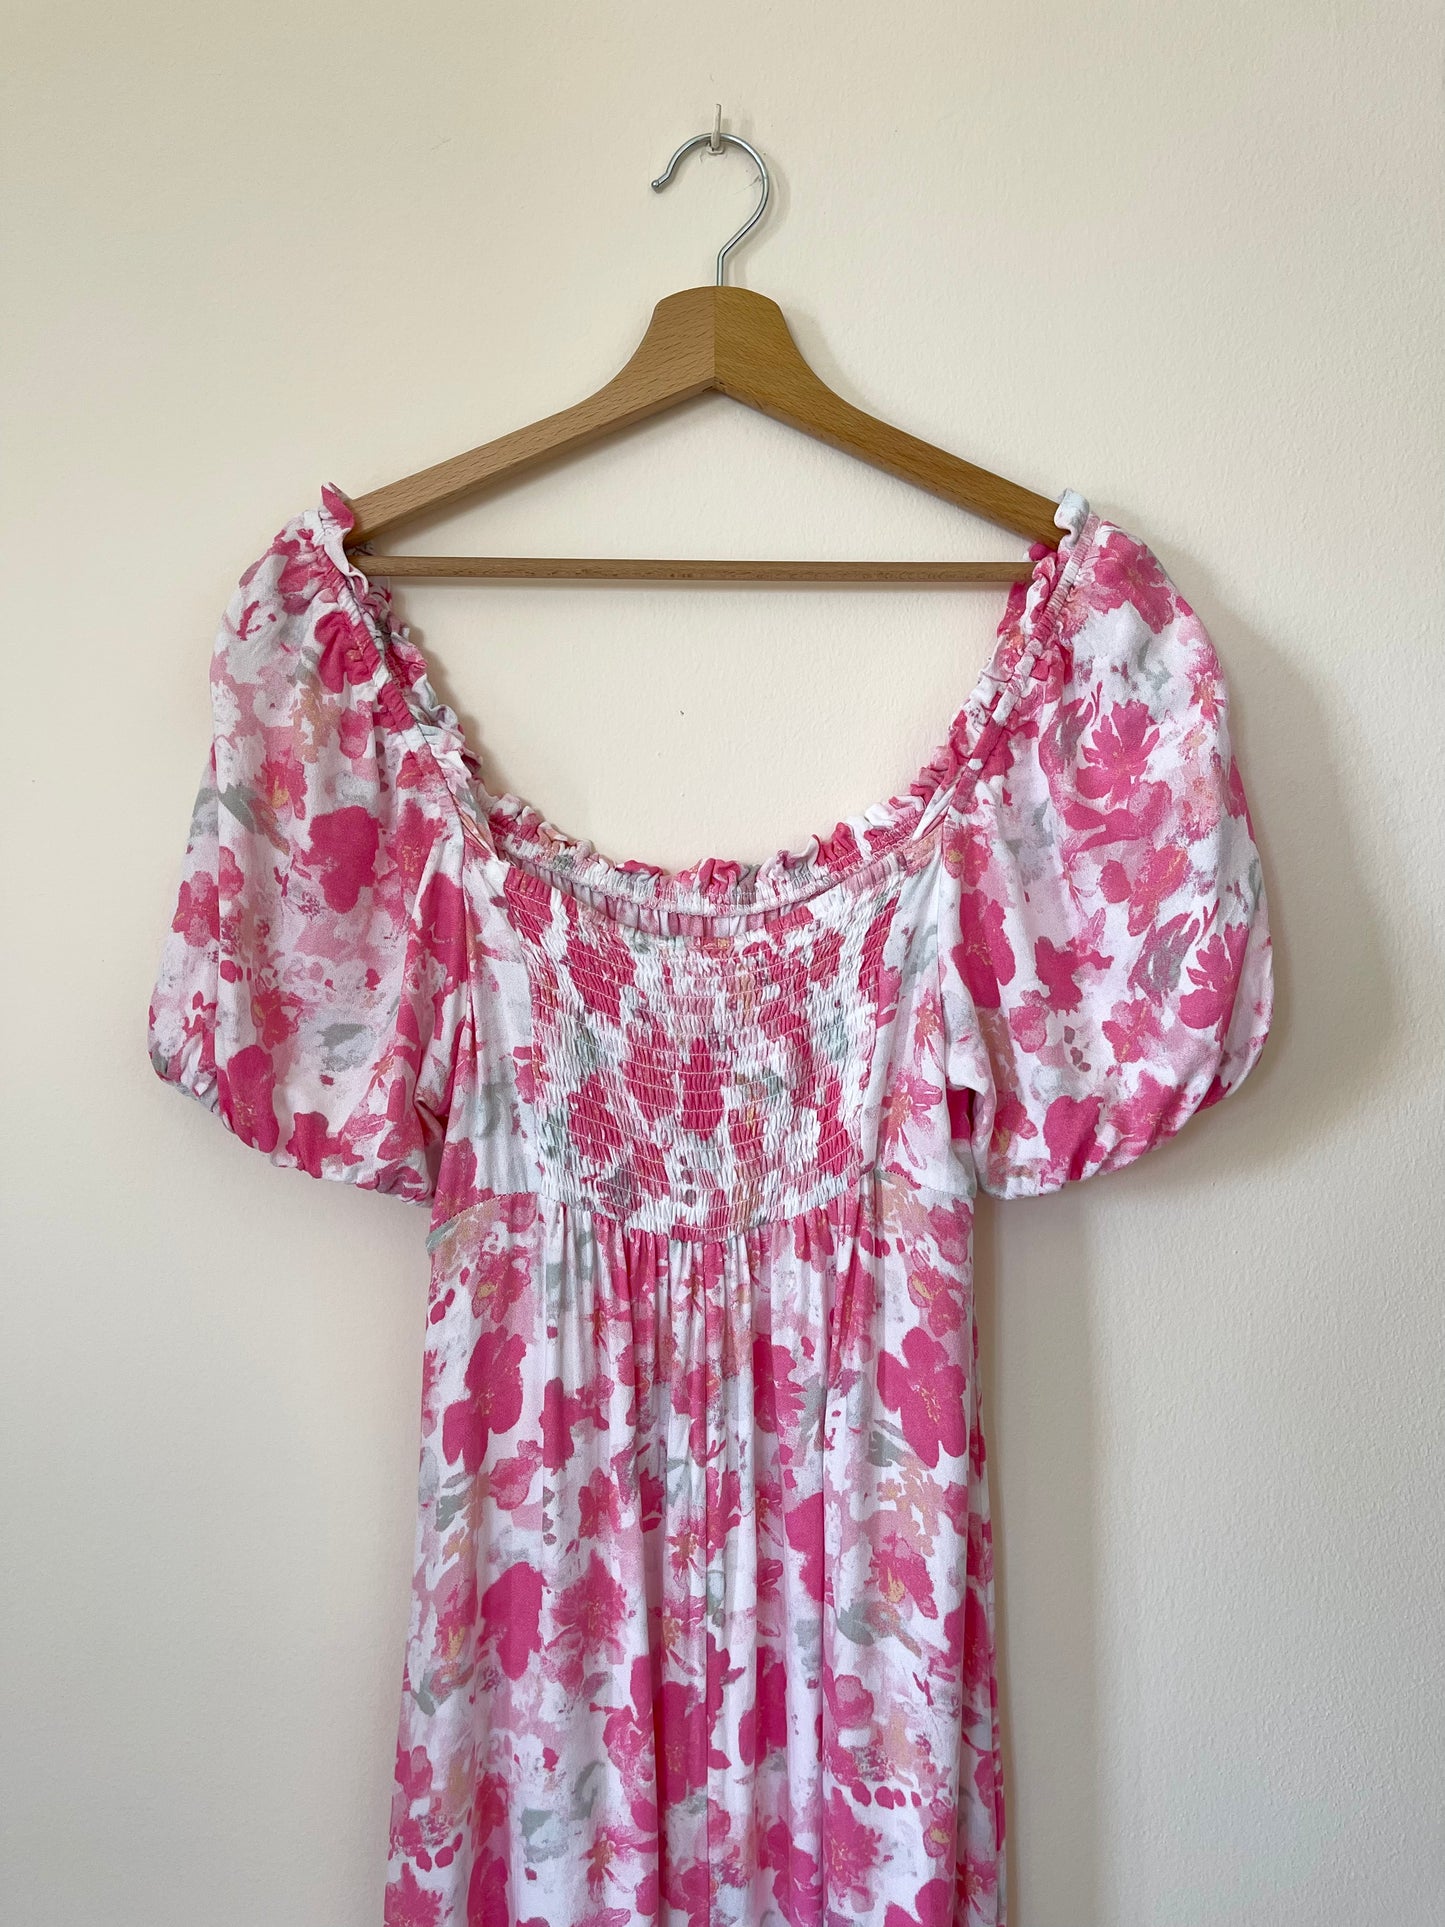 Cute light viscose dress with floral print